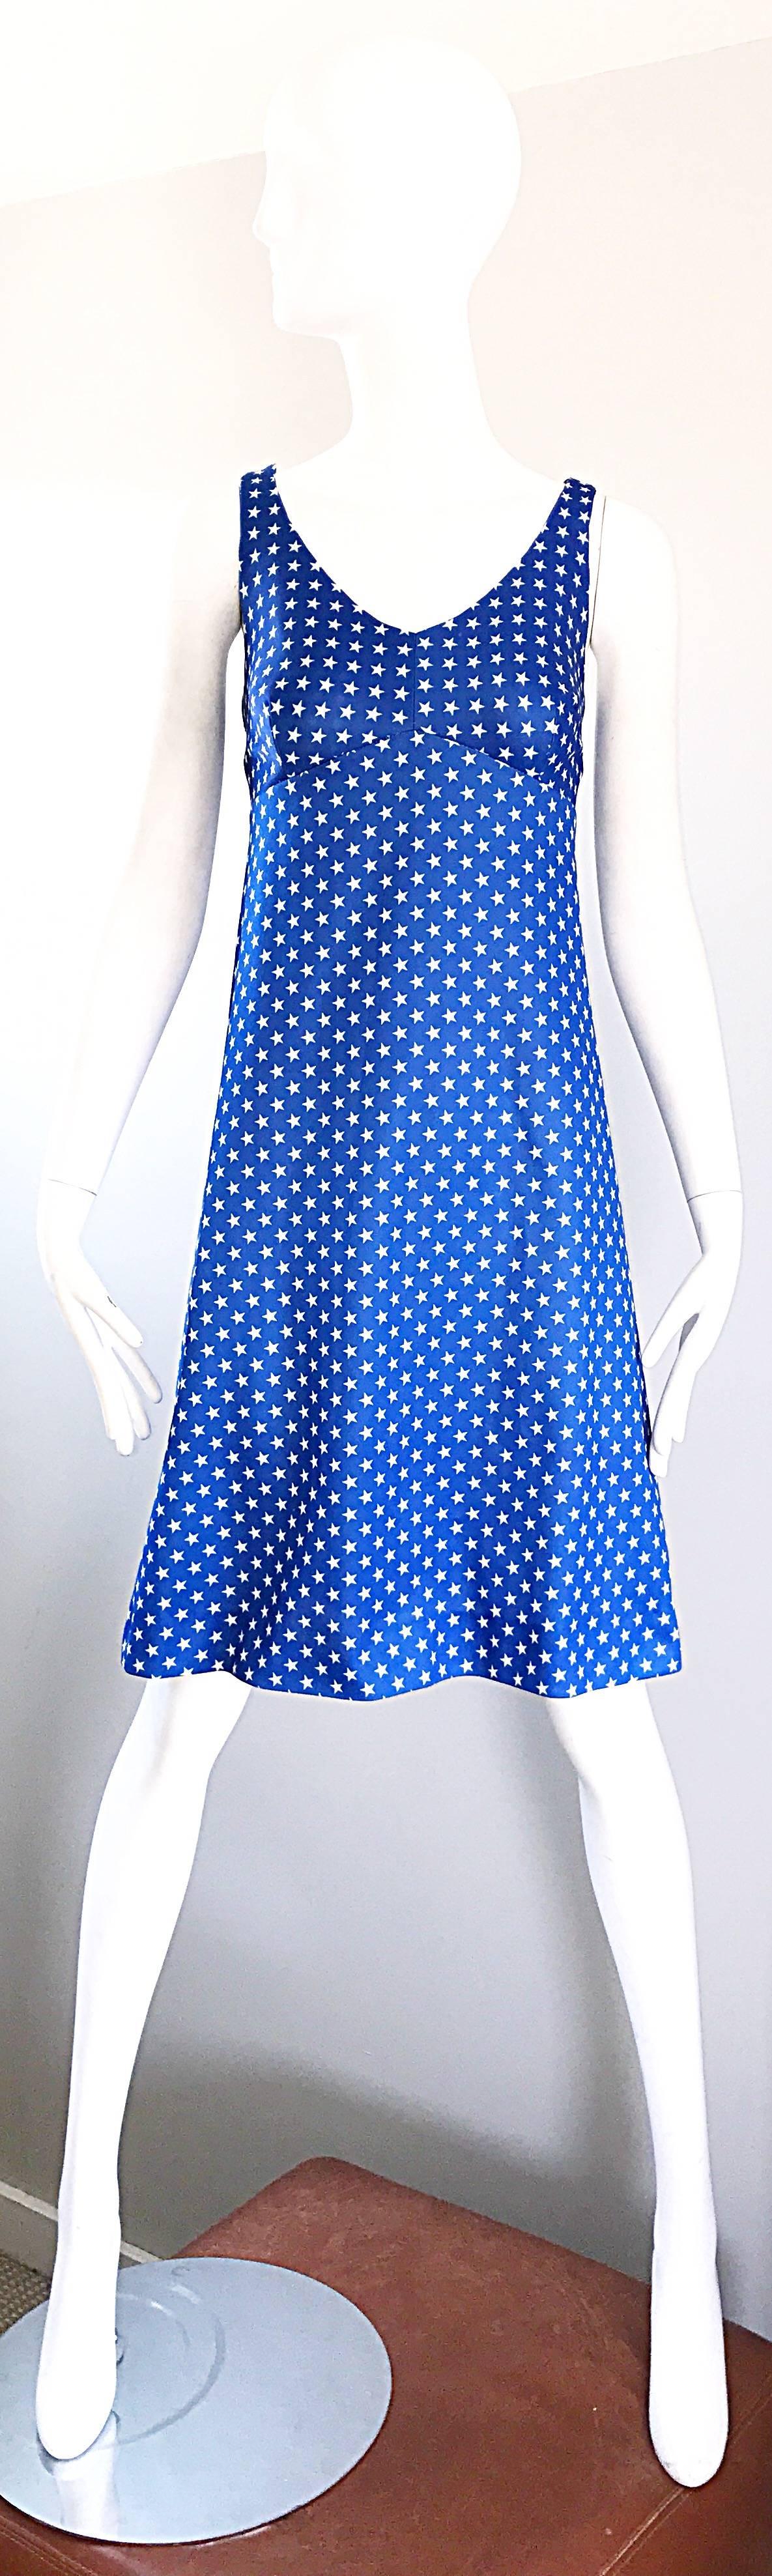 1960s Royal Blue and White Star Print A - Line Novelty Vintage 60s Dress For Sale 2